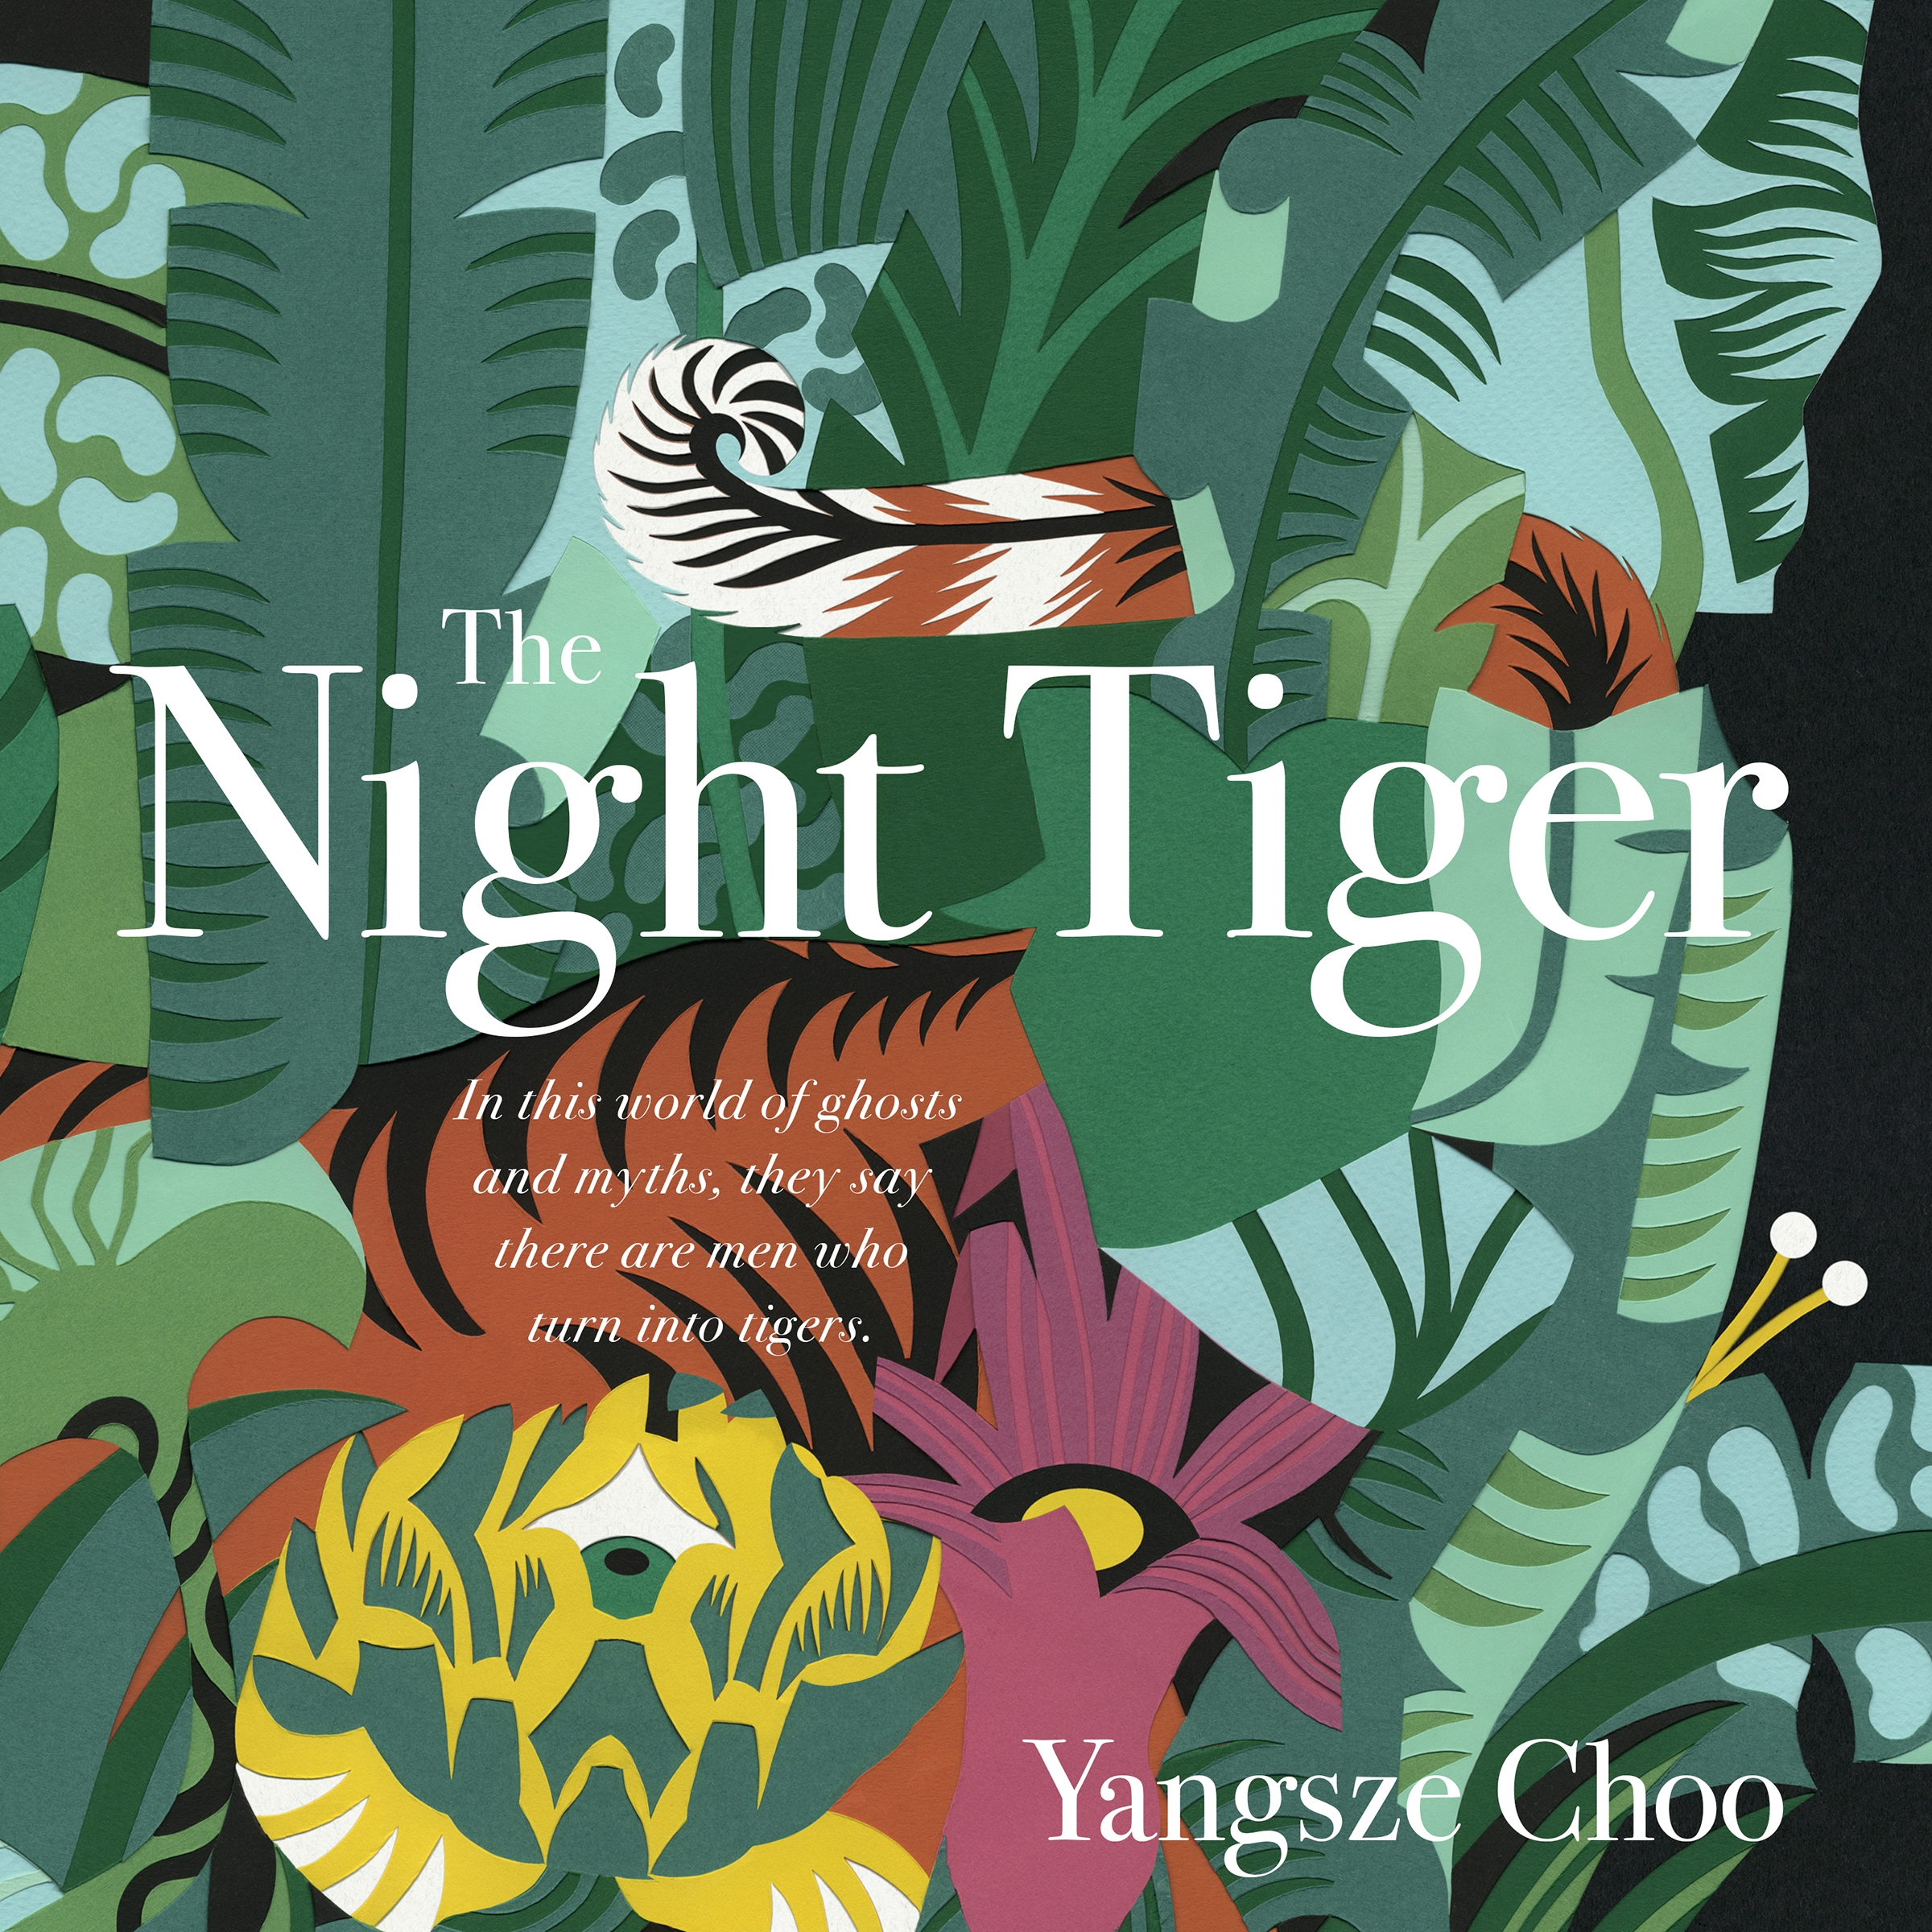 book the night tiger